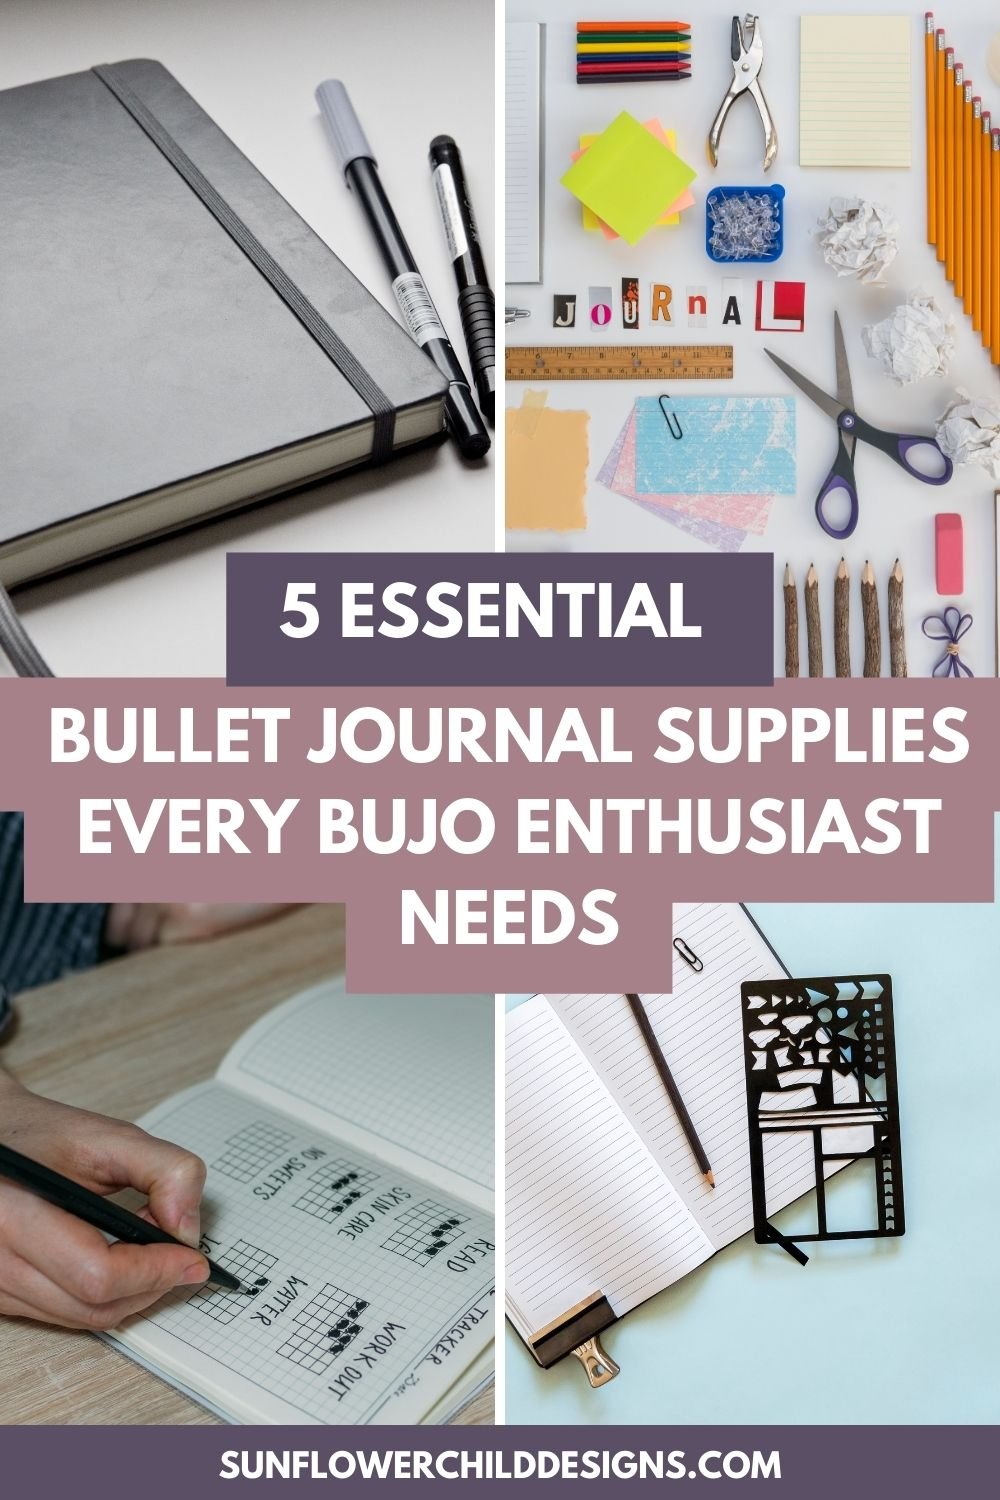 Bullet Journal Supplies - Which are necessary and which are not?